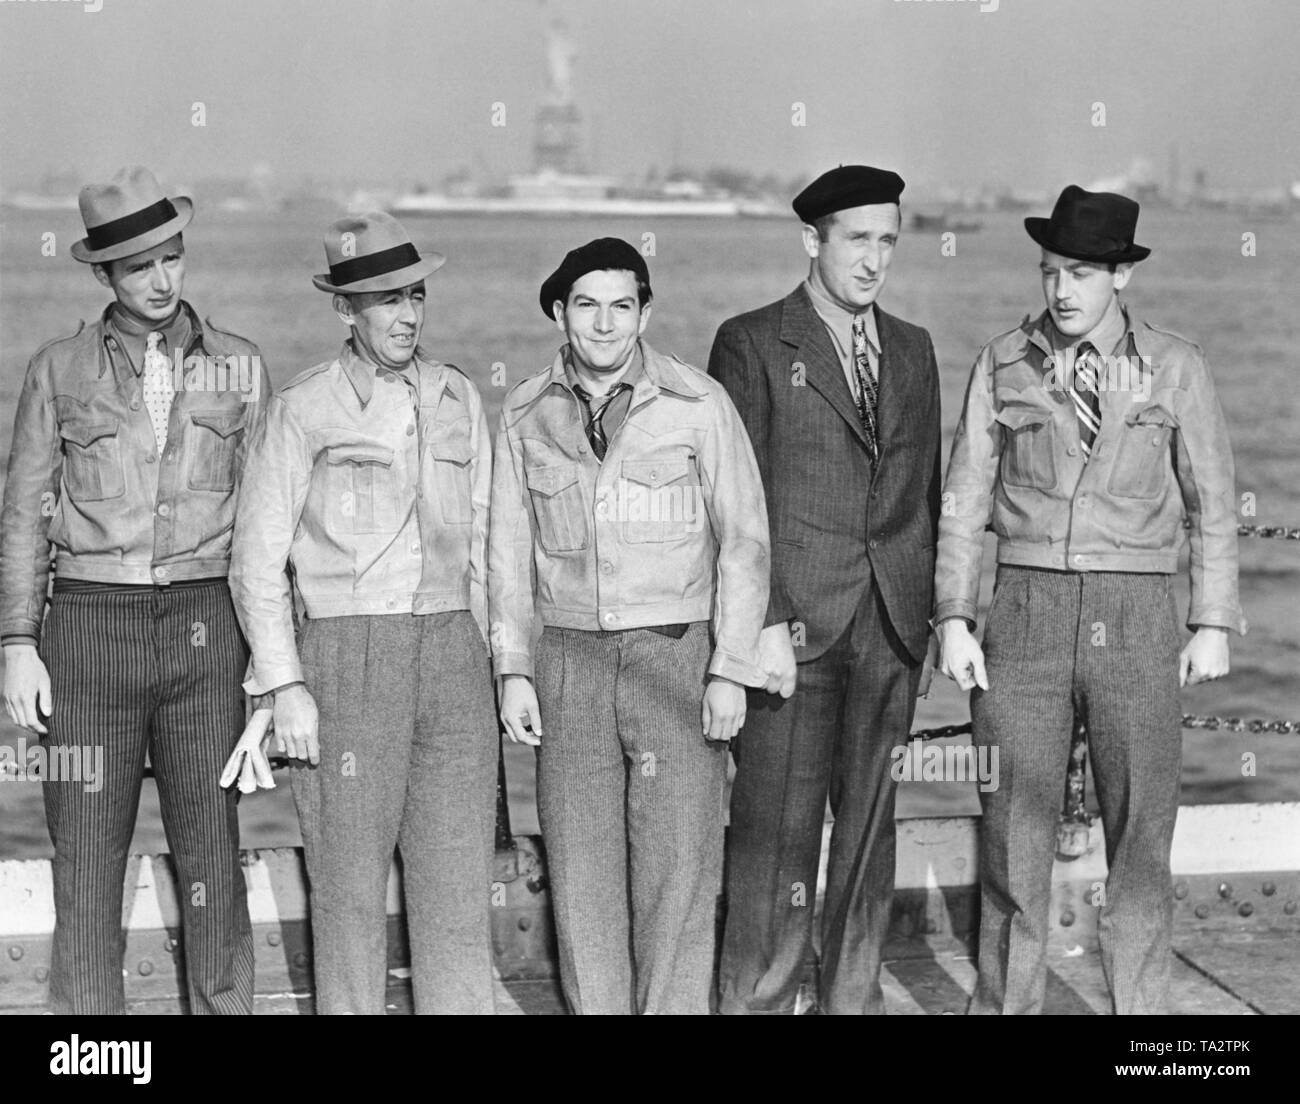 Photo of five American fighters of the Spanish Civil War from the International Brigade on the deck of the freighter 'Exiria' shortly before their arrival in the port of New York on March 17, 1940. The men were captured by Spanish national troops during the Spanish Civil War and had been released shortly before. From left to right: Rudolph O'Para, Clarence Blair, Cohn Haber, Anthony Kerhlicker, Larry Doran. In the background, the Statue of Liberty. Stock Photo